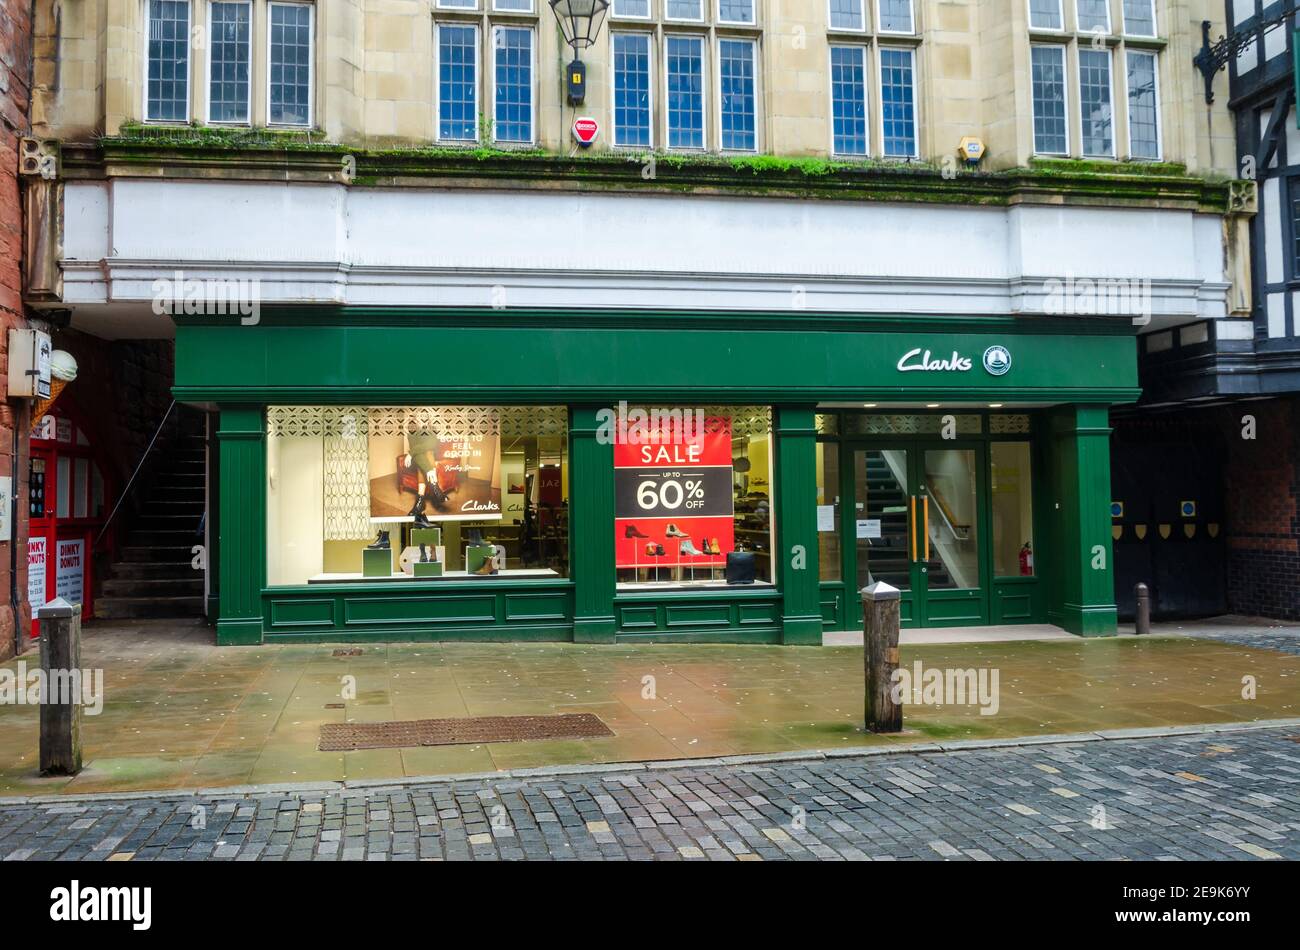 Chester; UK: Jan 29, 2021: The Clarks store on Foregate Street is having a  sale with reductions of up to 60 Stock Photo - Alamy